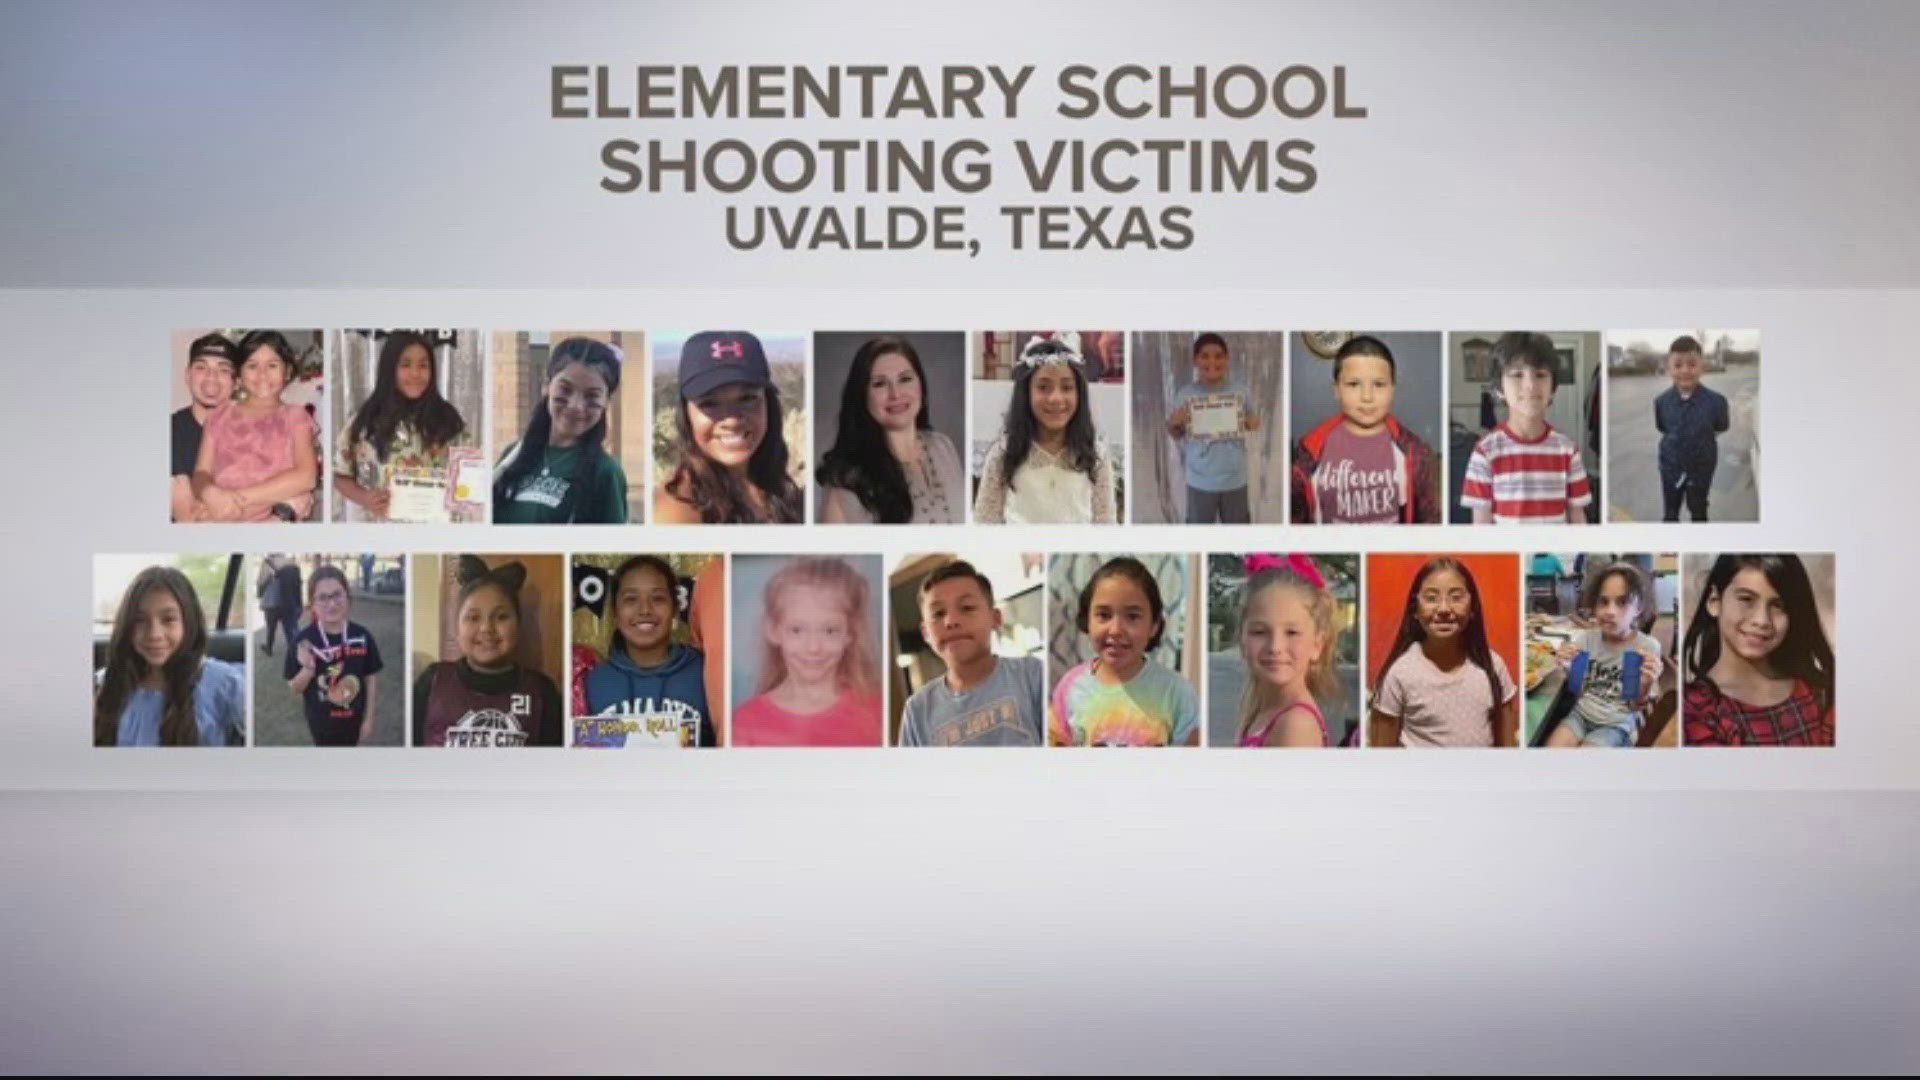 Families of many of the Robb Elementary shooting victims have filed wrongful death lawsuits again Meta, Activision and Daniel Defense.